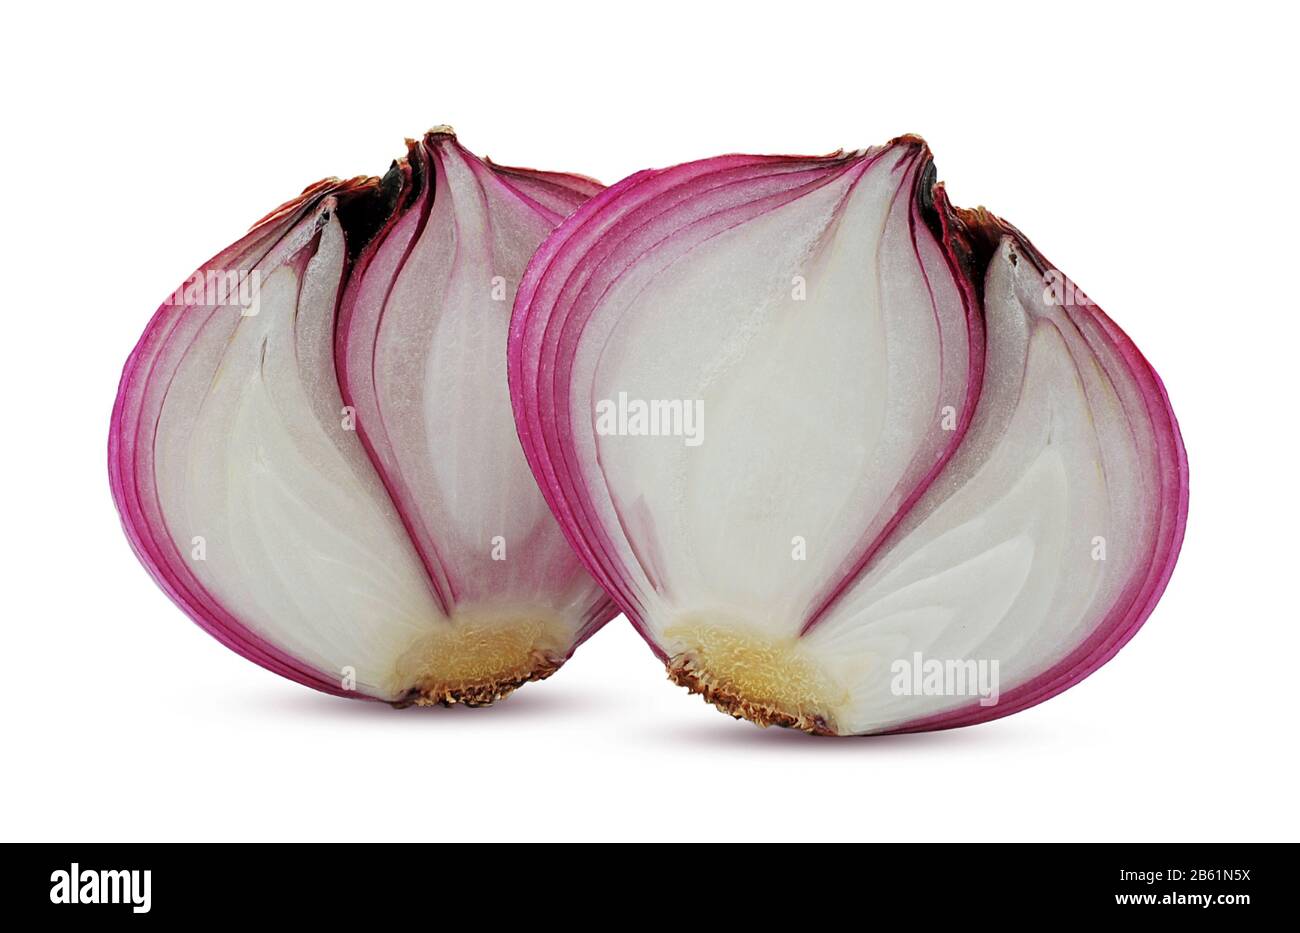 Red onion vegetable isolated on white background Stock Photo